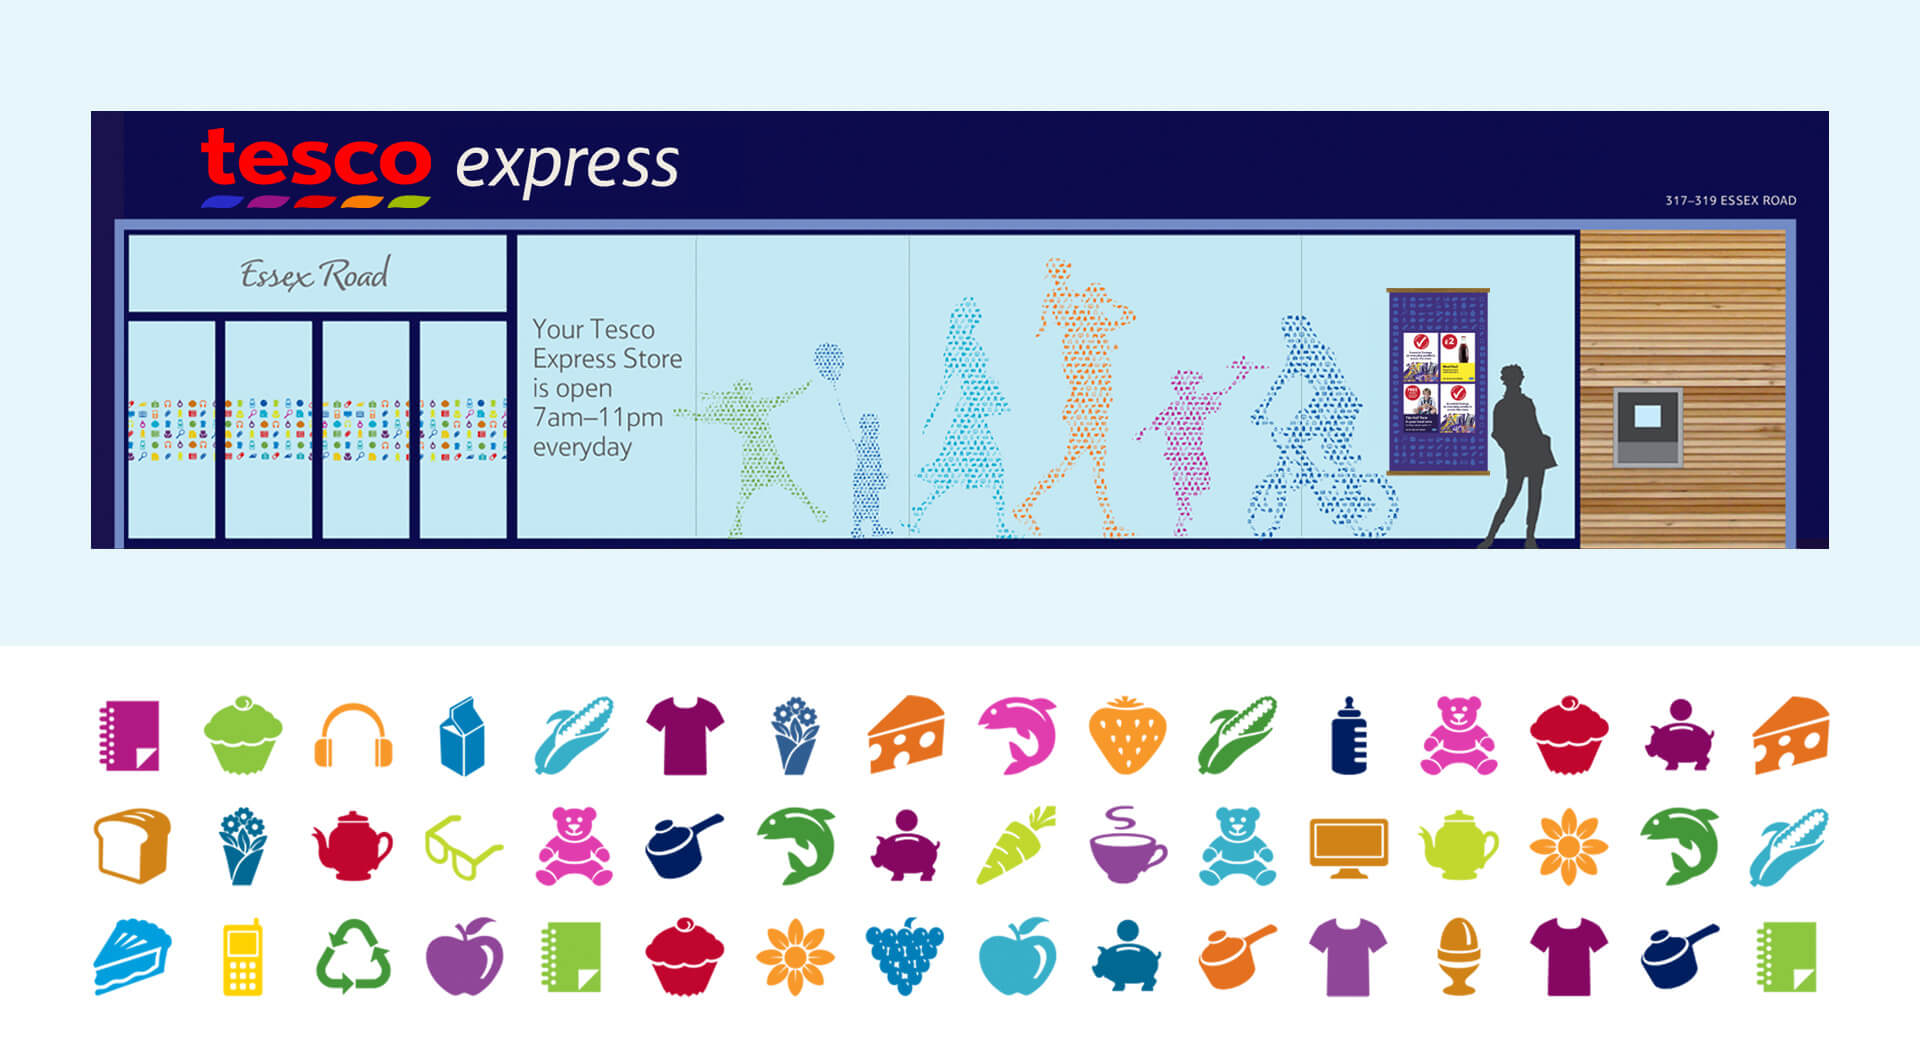 Rebranding Tesco express brand identity on convenience stores